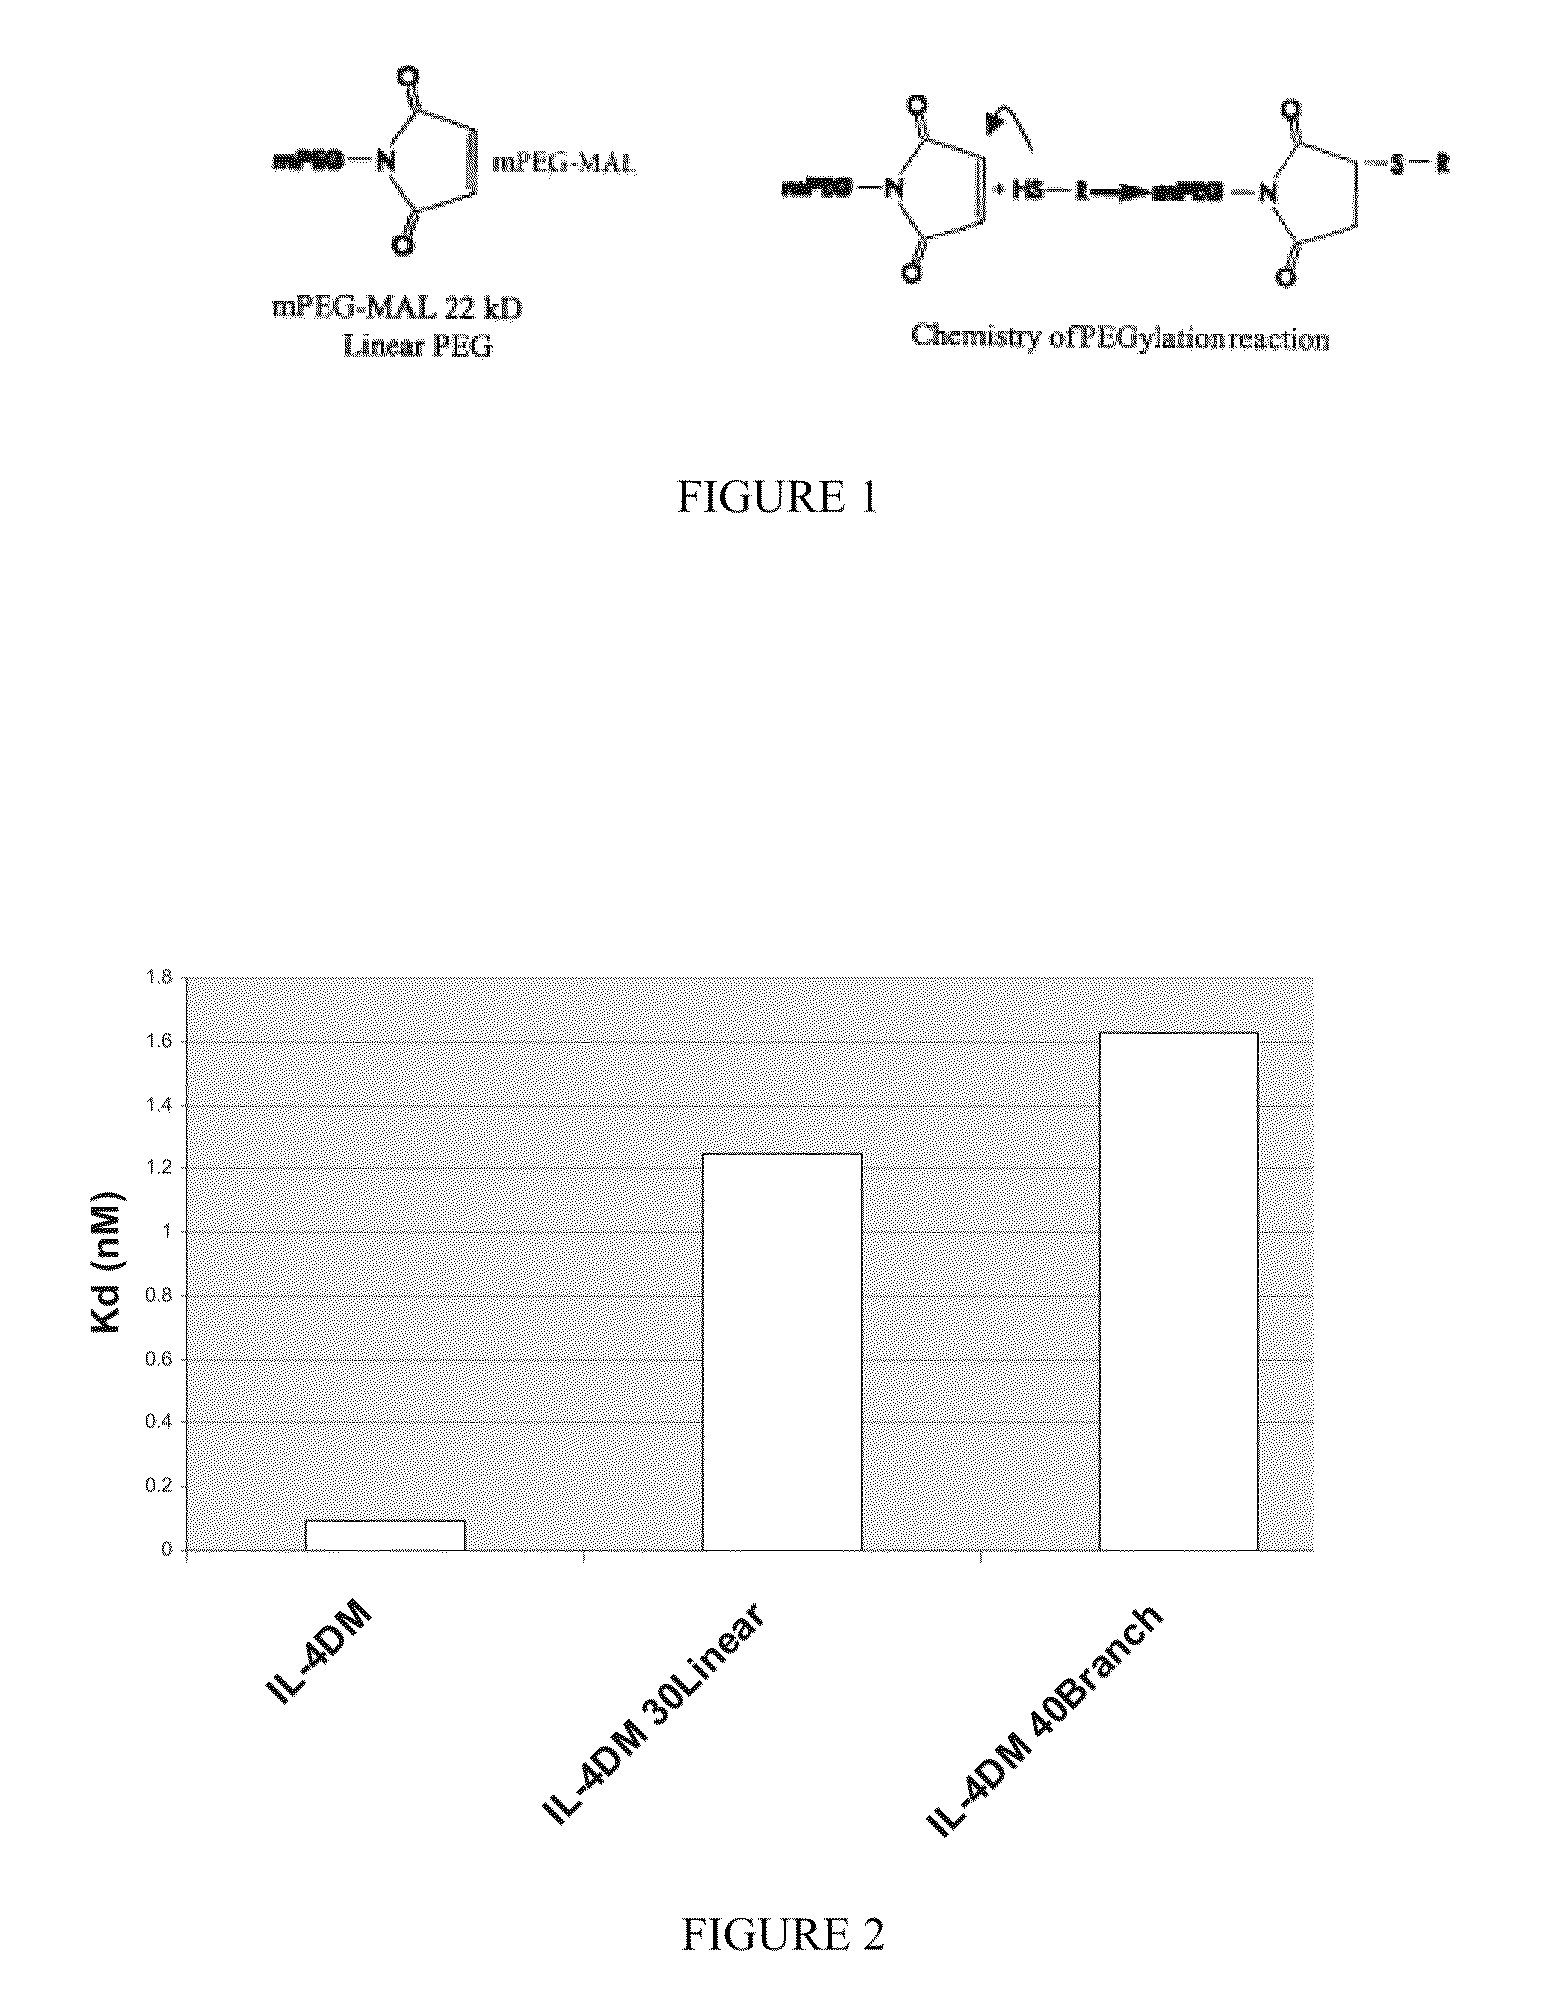 Modified IL-4 mutein receptor antagonists